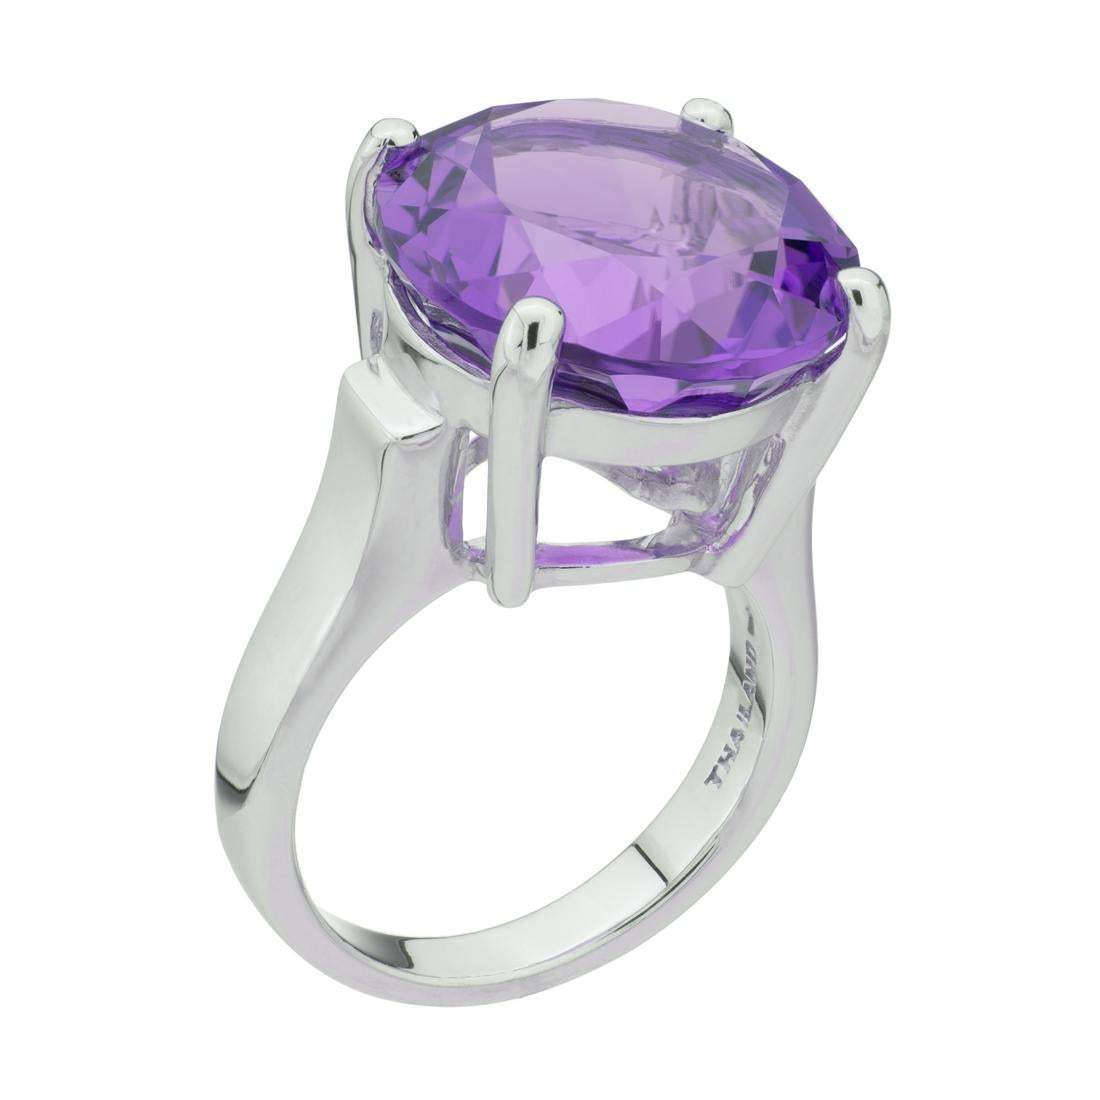 Stunning Silver 11.70ct Amethyst Solitaire Ring-SZ 7 - Shop Thrifty Treasures